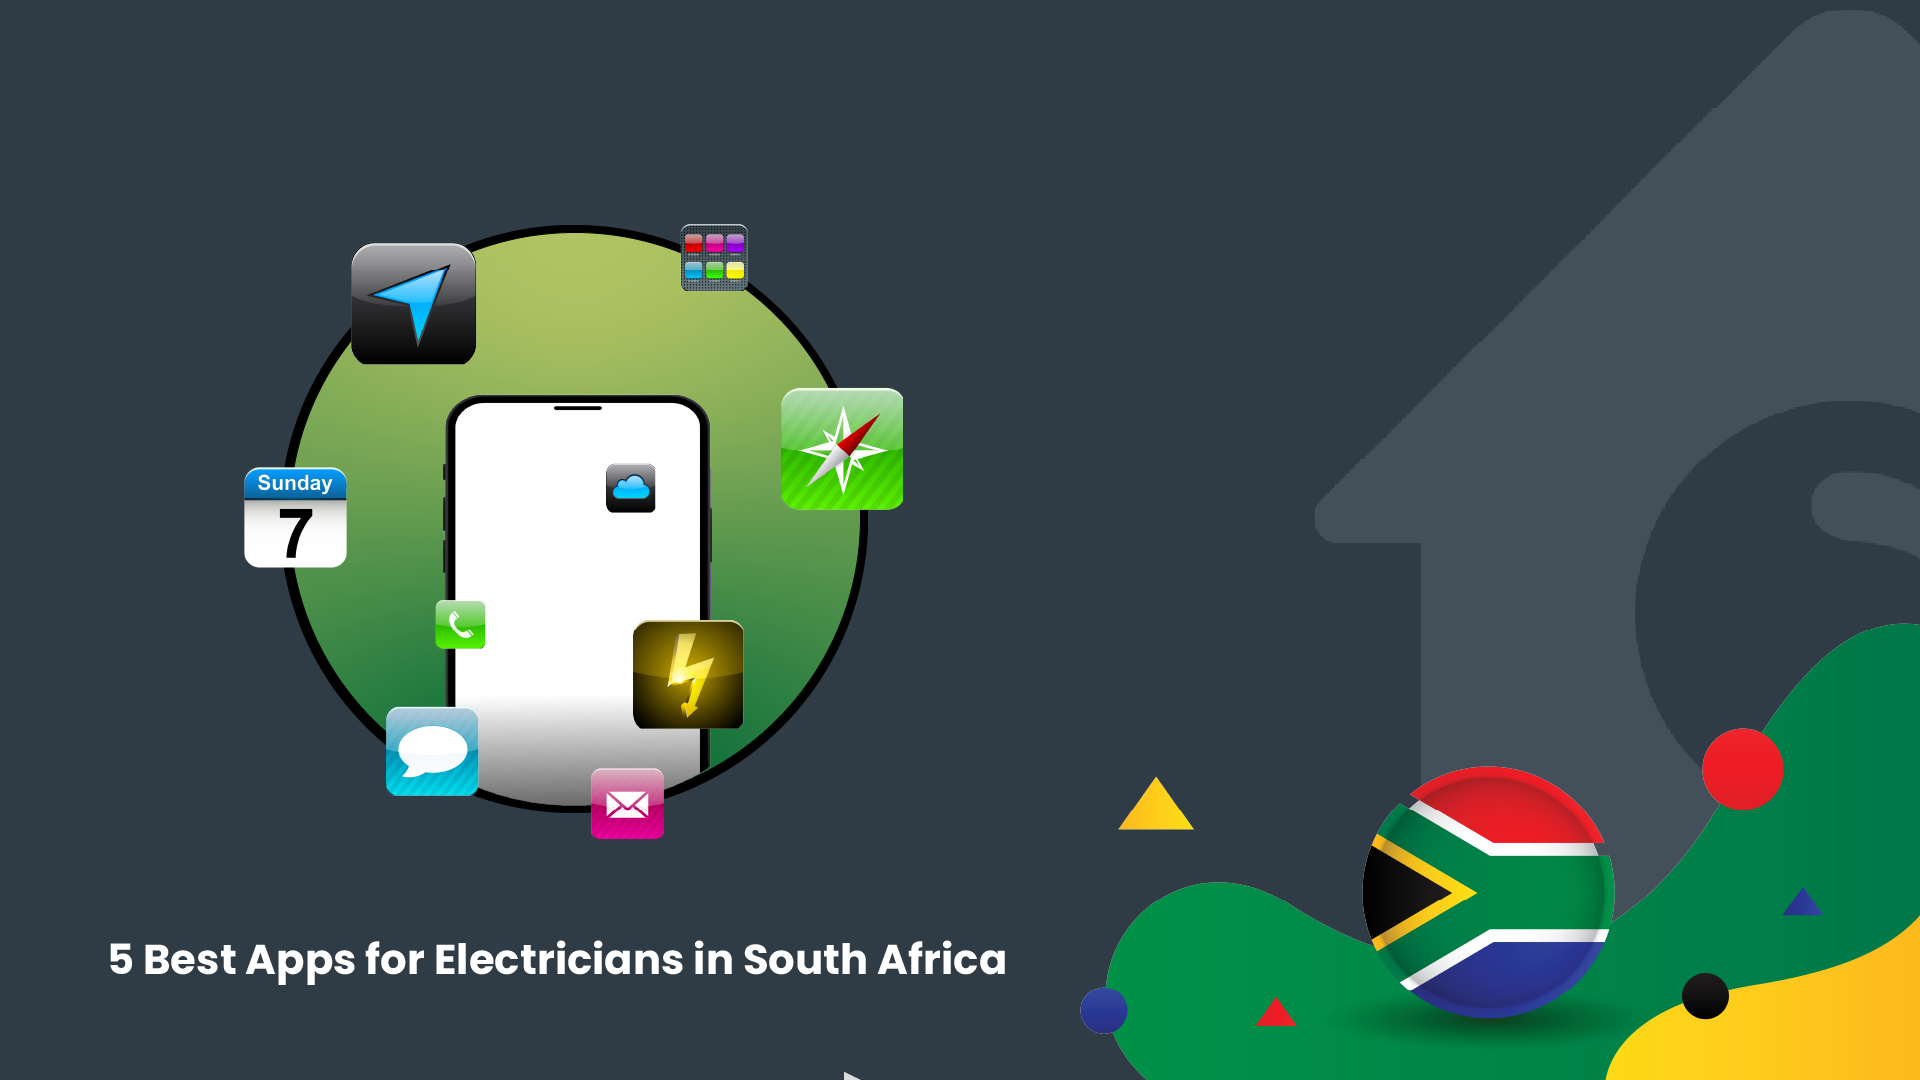 5 Best Apps for Electricians in South Africa